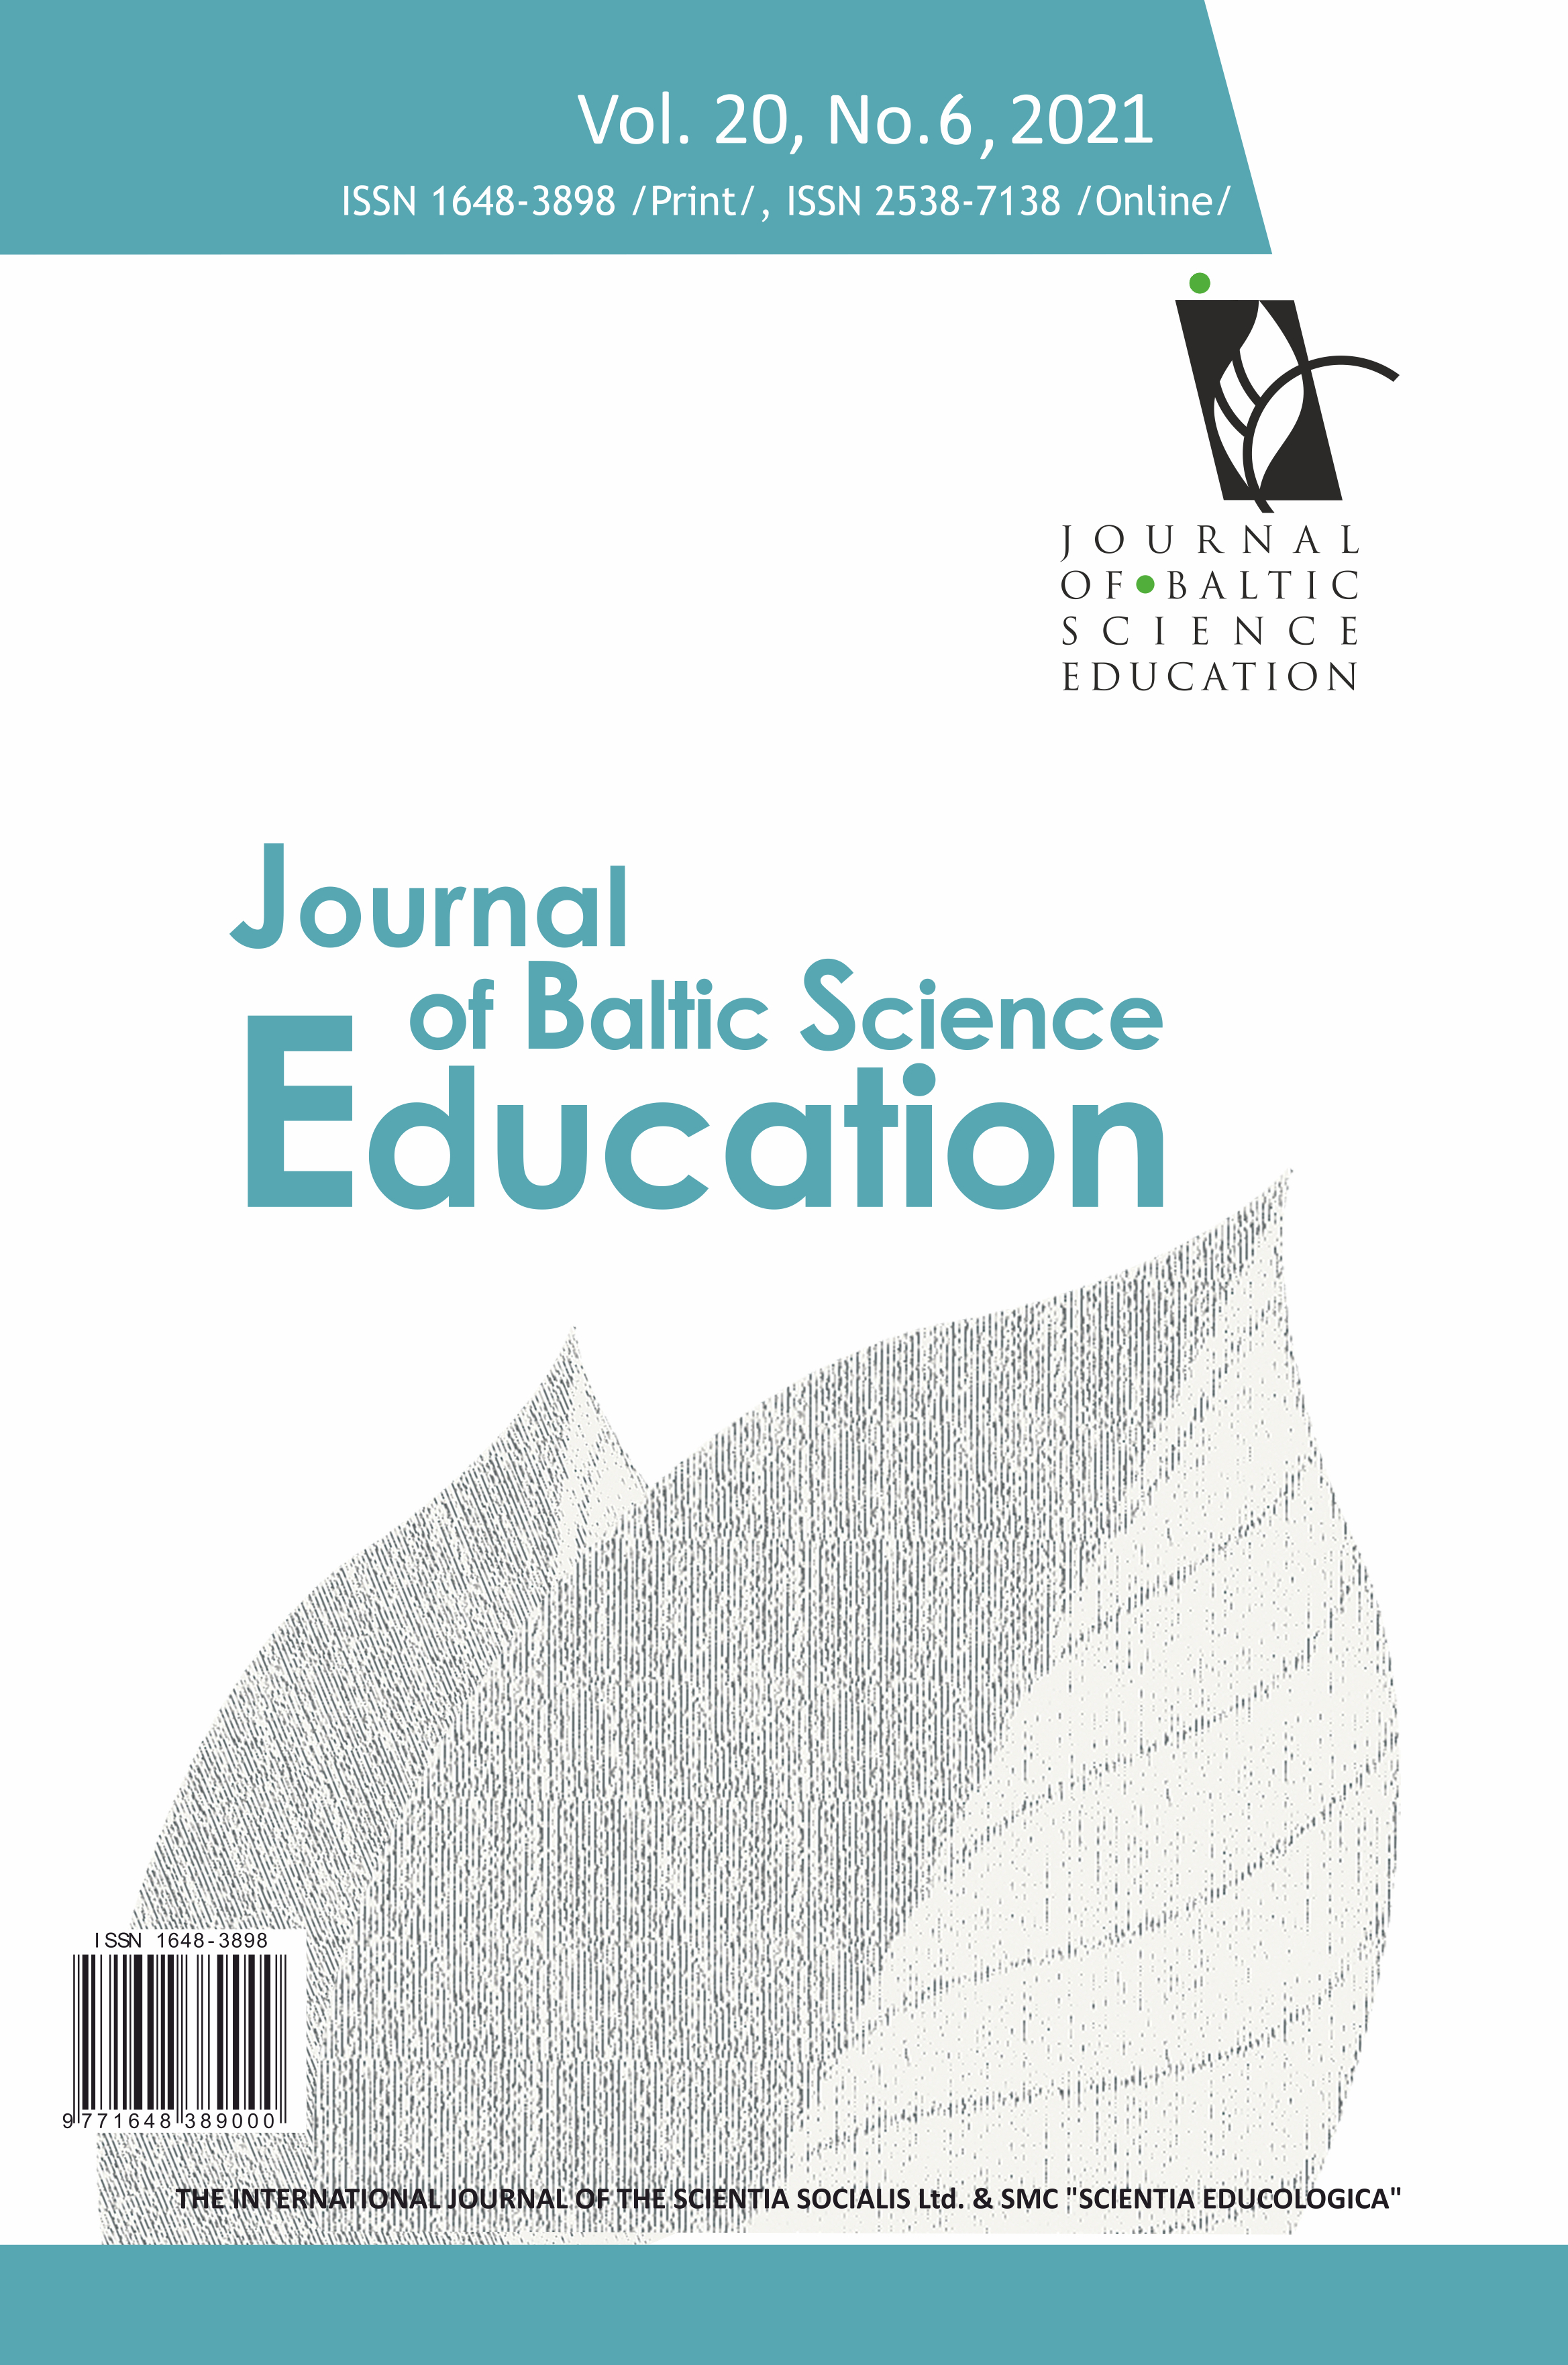 THE EFFECT OF REACT STRATEGY ON ACHIEVEMENT IN SCIENCE EDUCATION: A MIXED RESEARCH SYNTHESIS